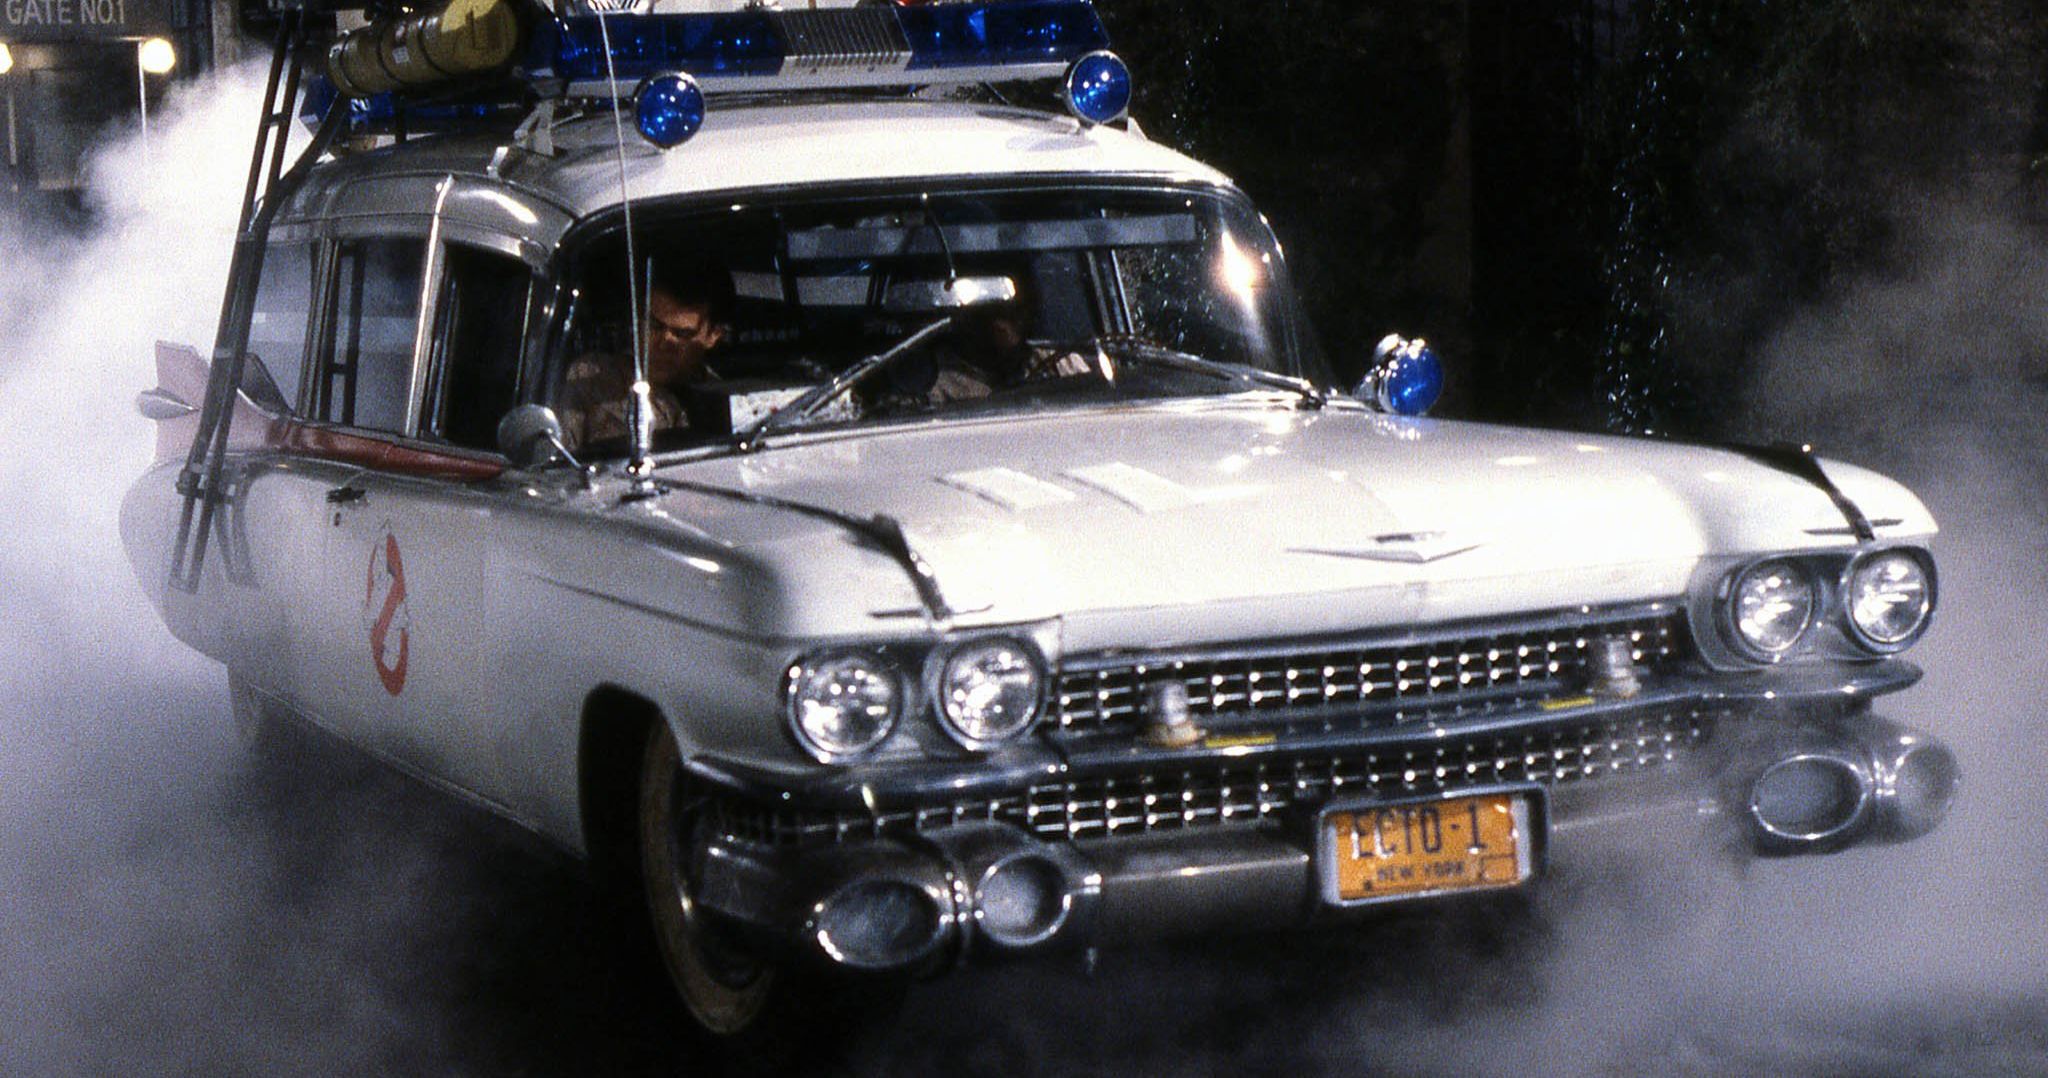 Ghostbusters 2020 Set Video Shows Upgraded Ecto-1 in Action